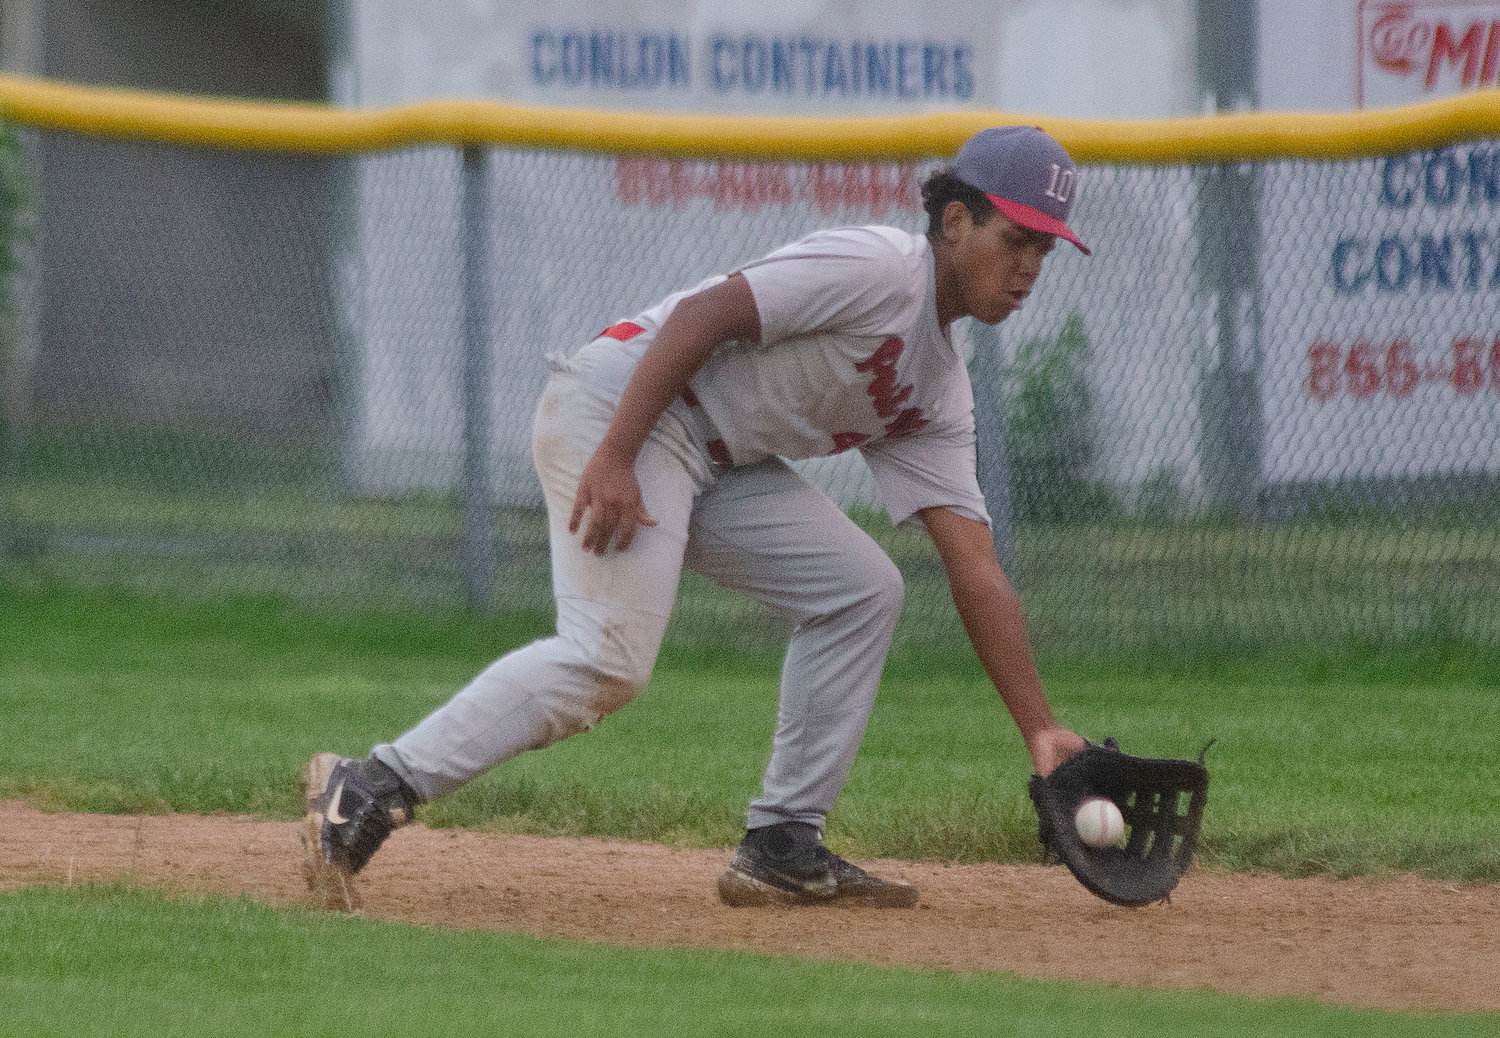 Post 10 first baseman Zumel Vargas snares a grounder up the first base line Thursday night, July 29.